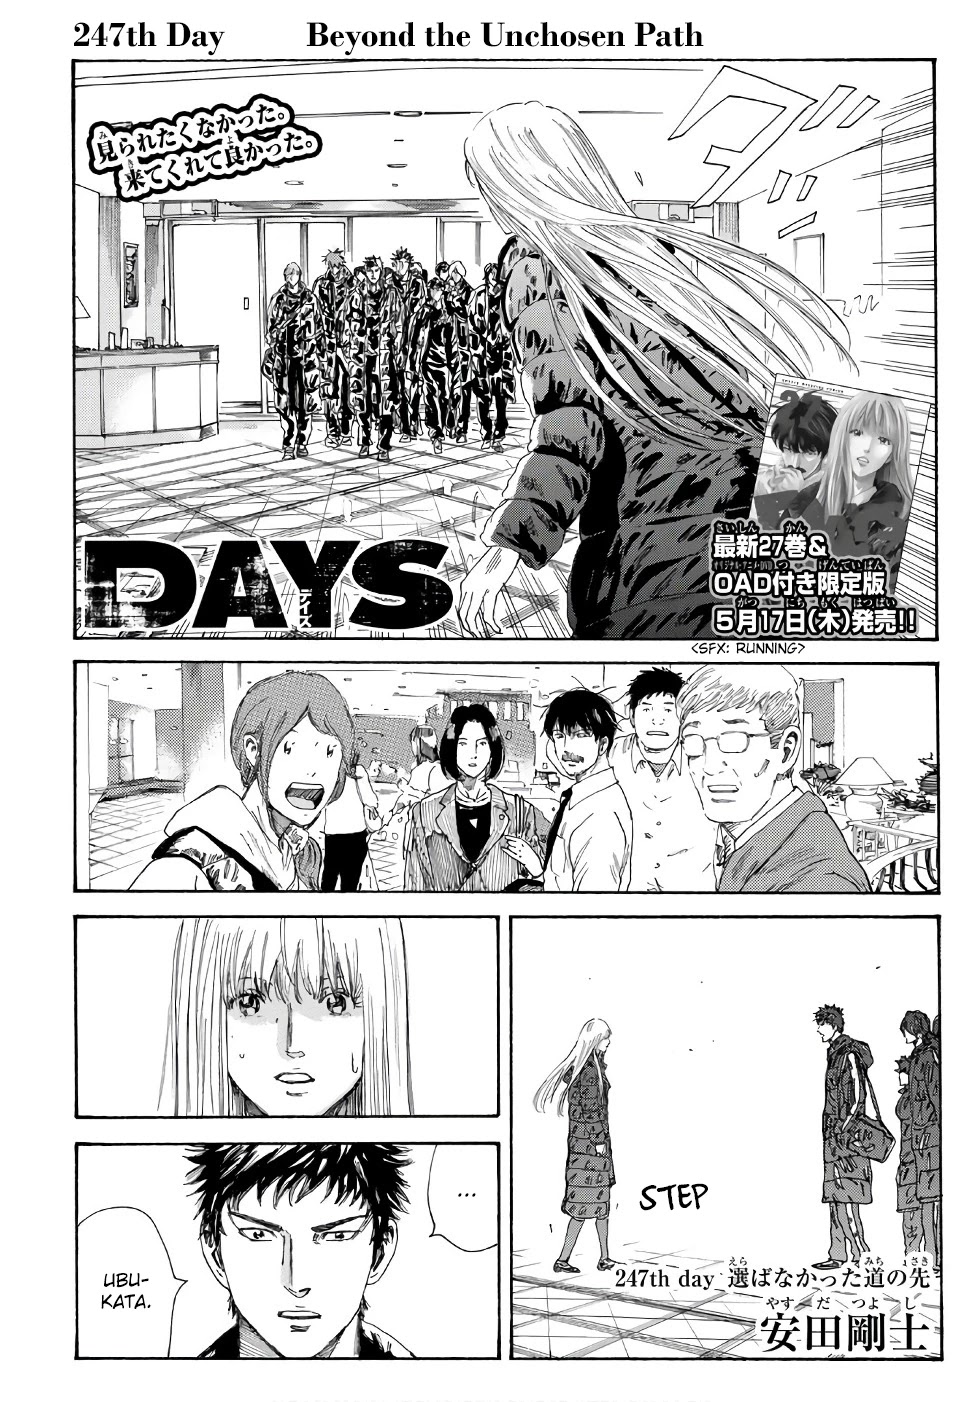 Days Chapter 247 Beyond The Unchosen Path